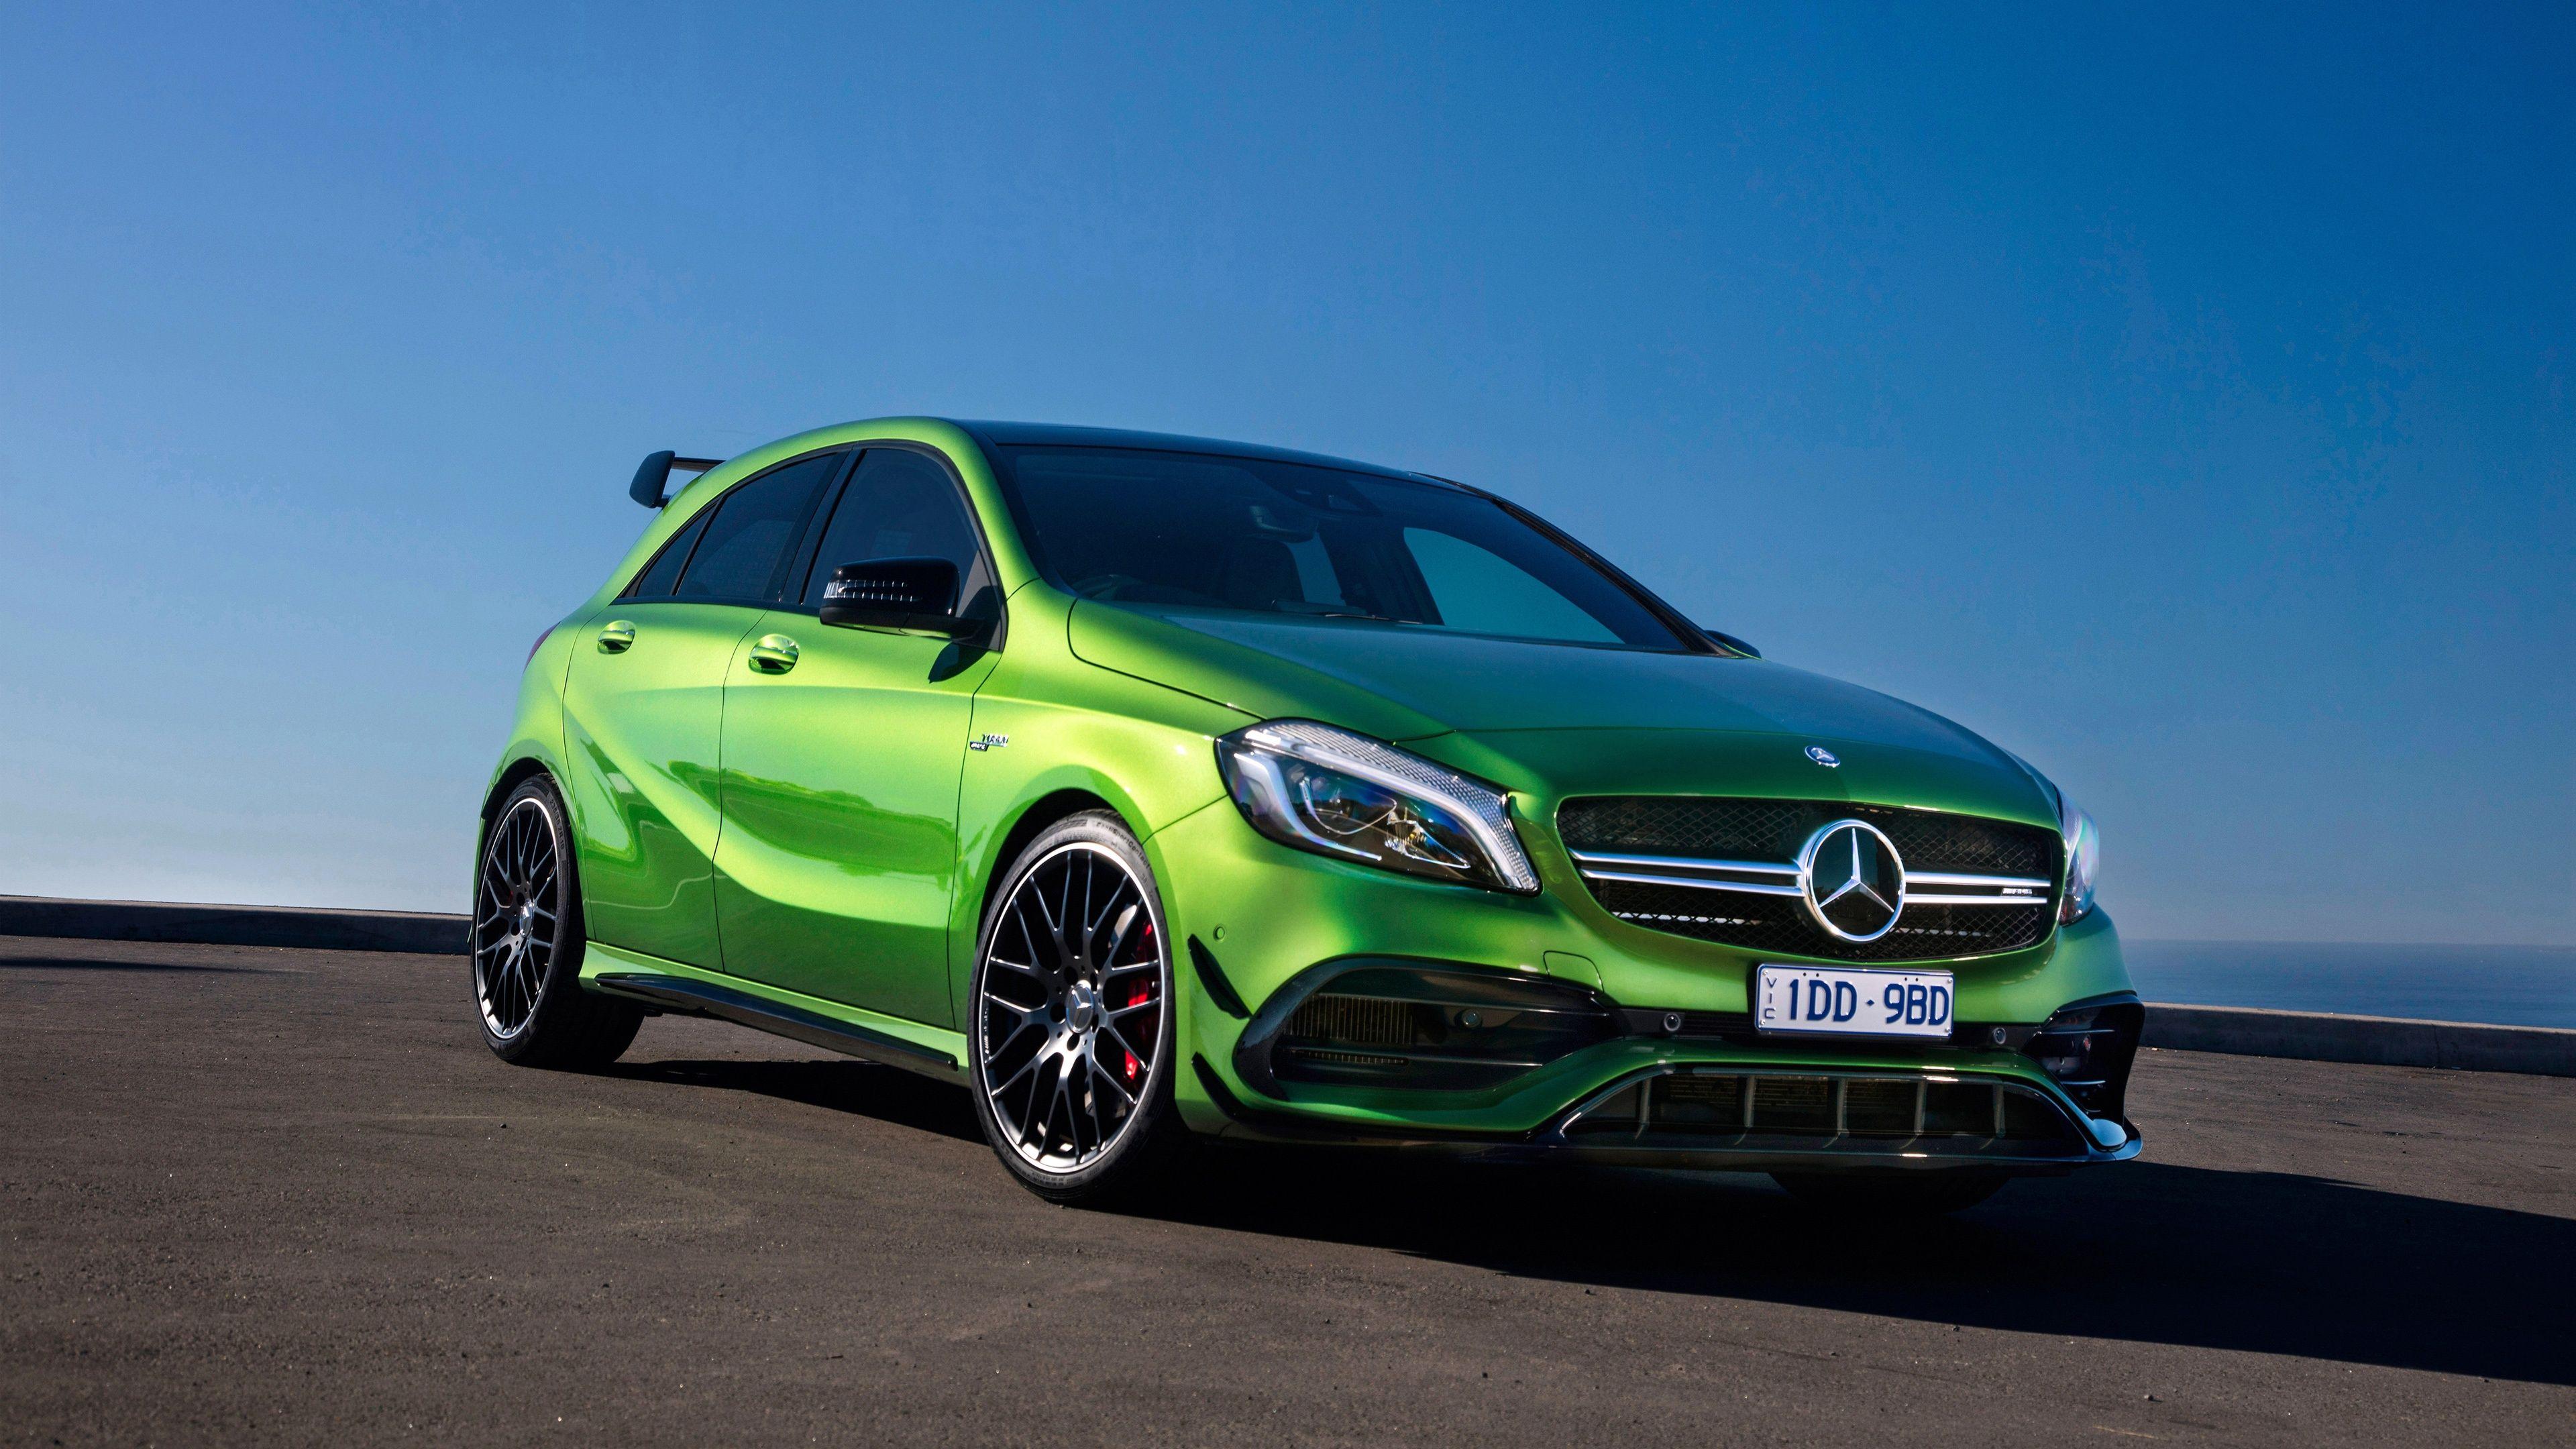 Mercedes Benz Amg A45 Wallpapers Top Free Mercedes Benz Amg A45 Images, Photos, Reviews